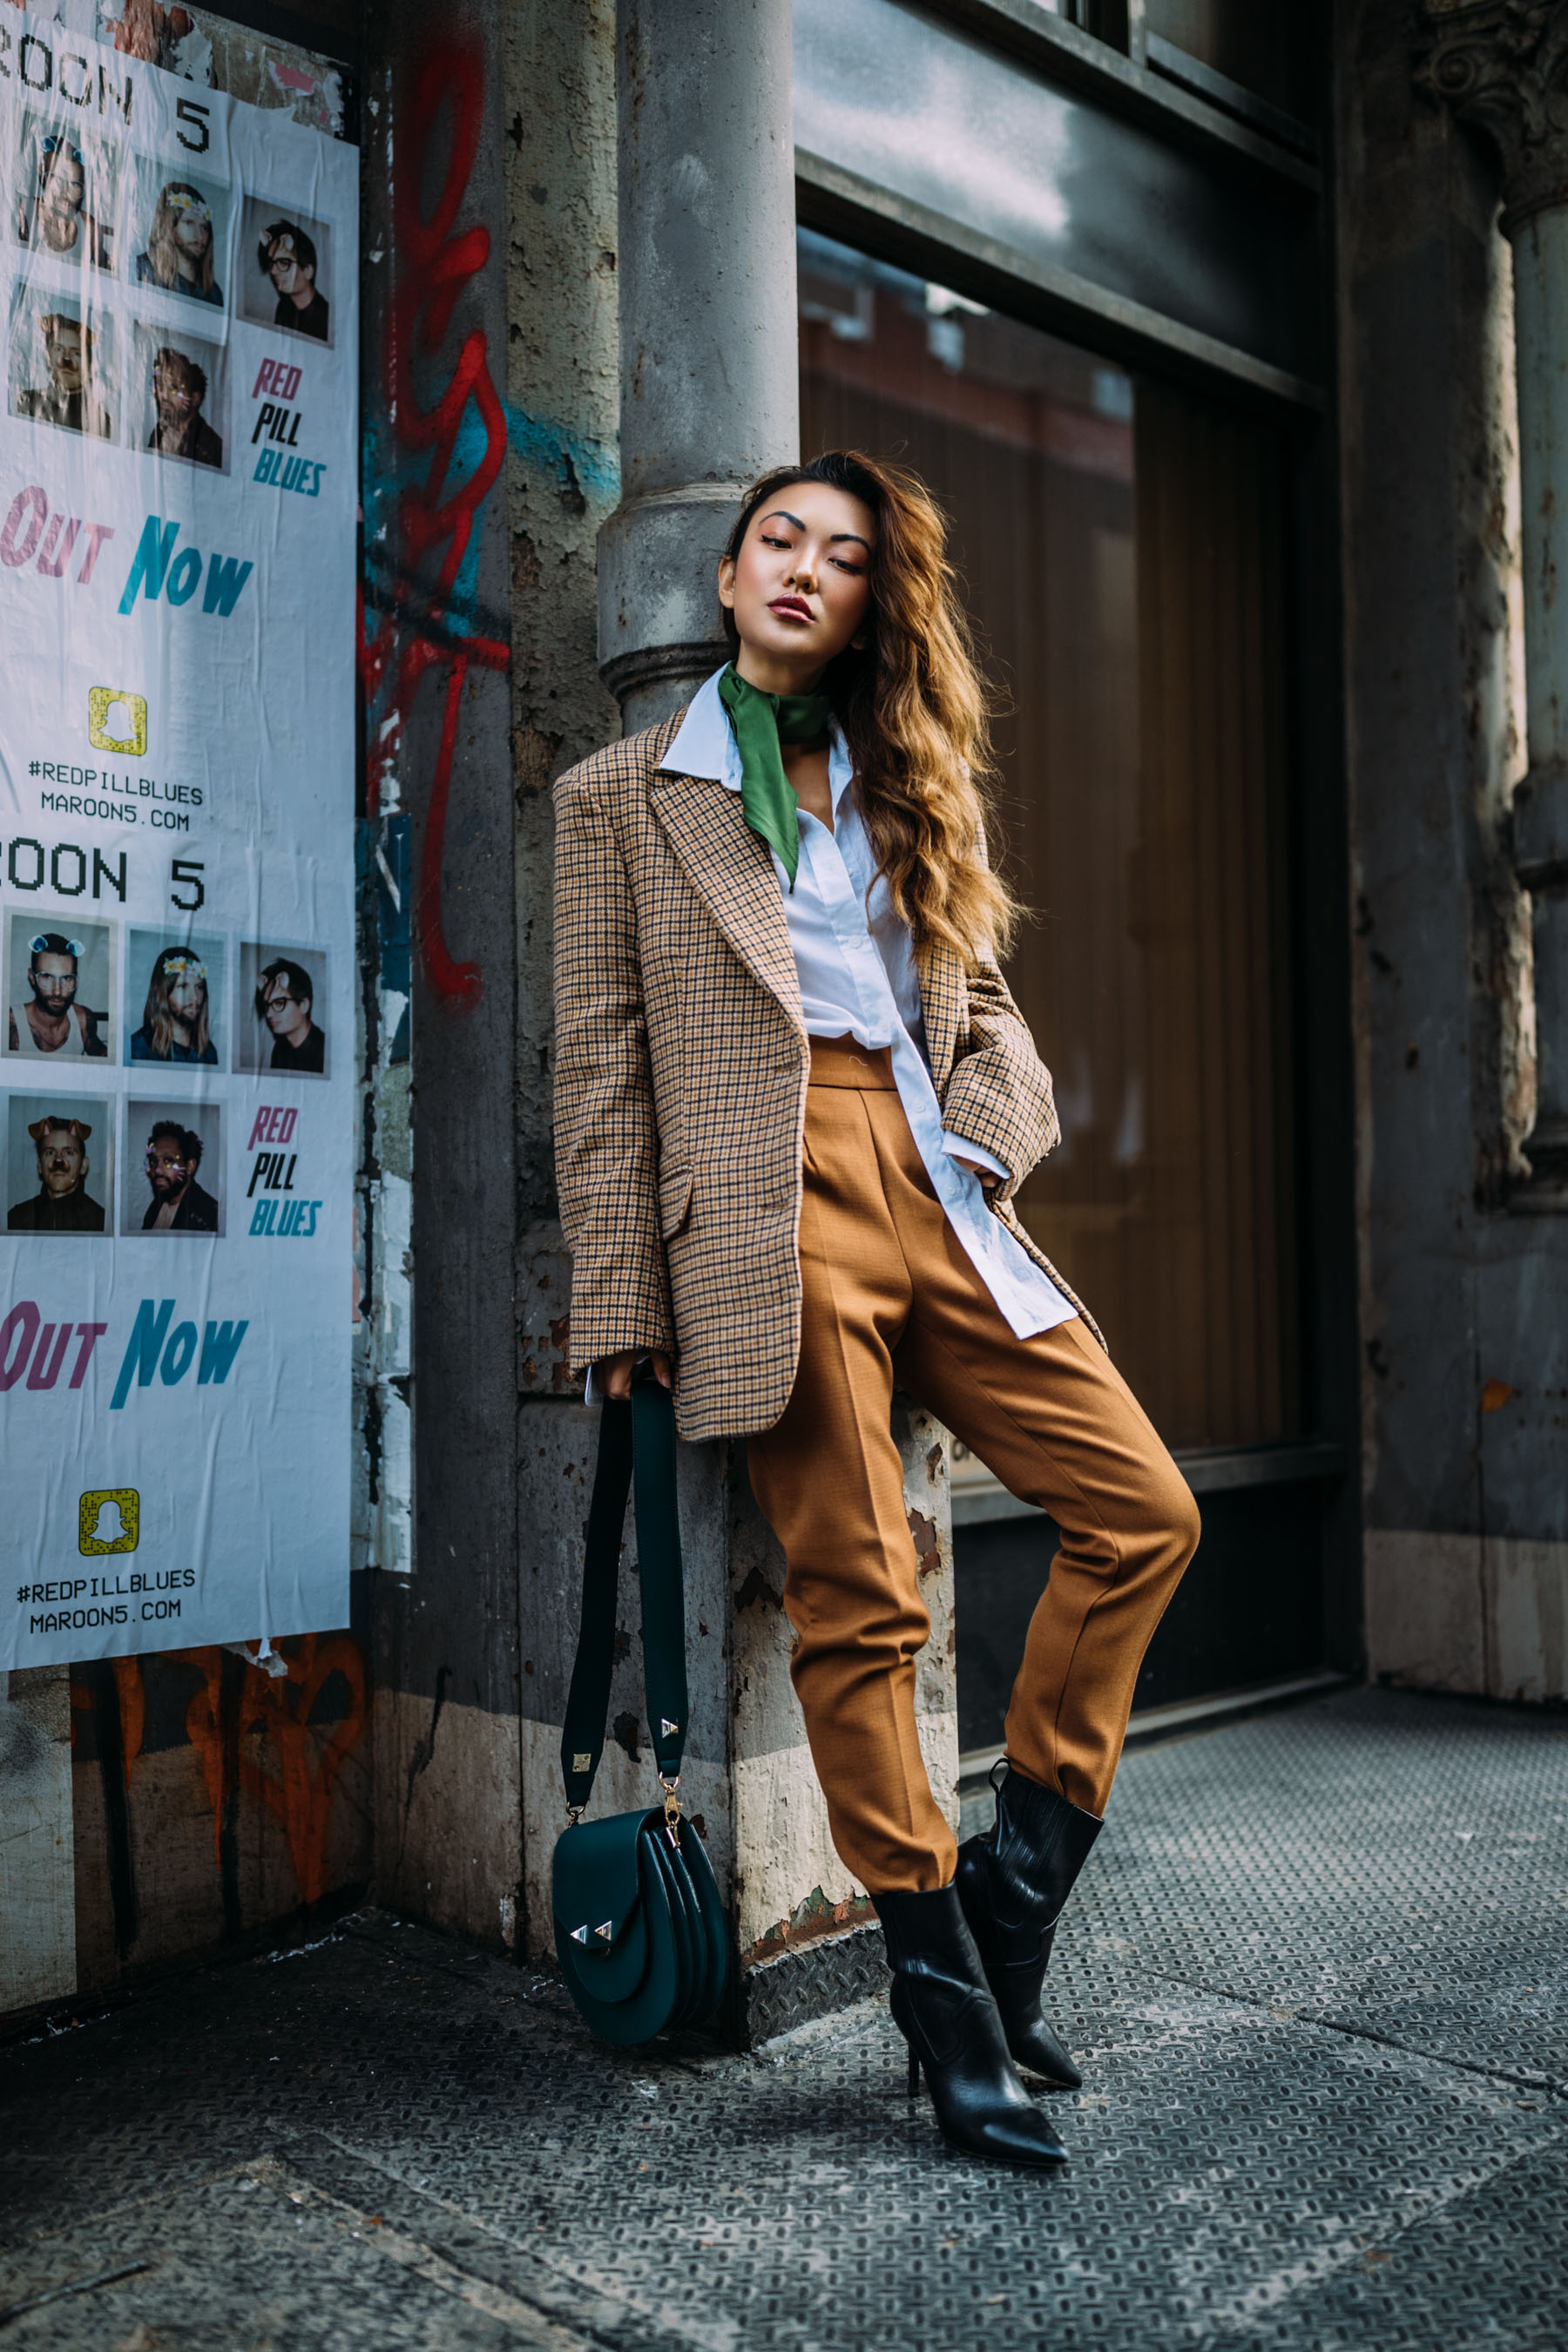 4 Key Pieces to Pull Off Menswear-Inspired Outfits // Notjessfashion.com // NYC fashion blogger, top fashion blogger, asian blogger, oversized blazer, plaid blazer, menswear inspired fashion, jessica wang, green accessories, street style fashion